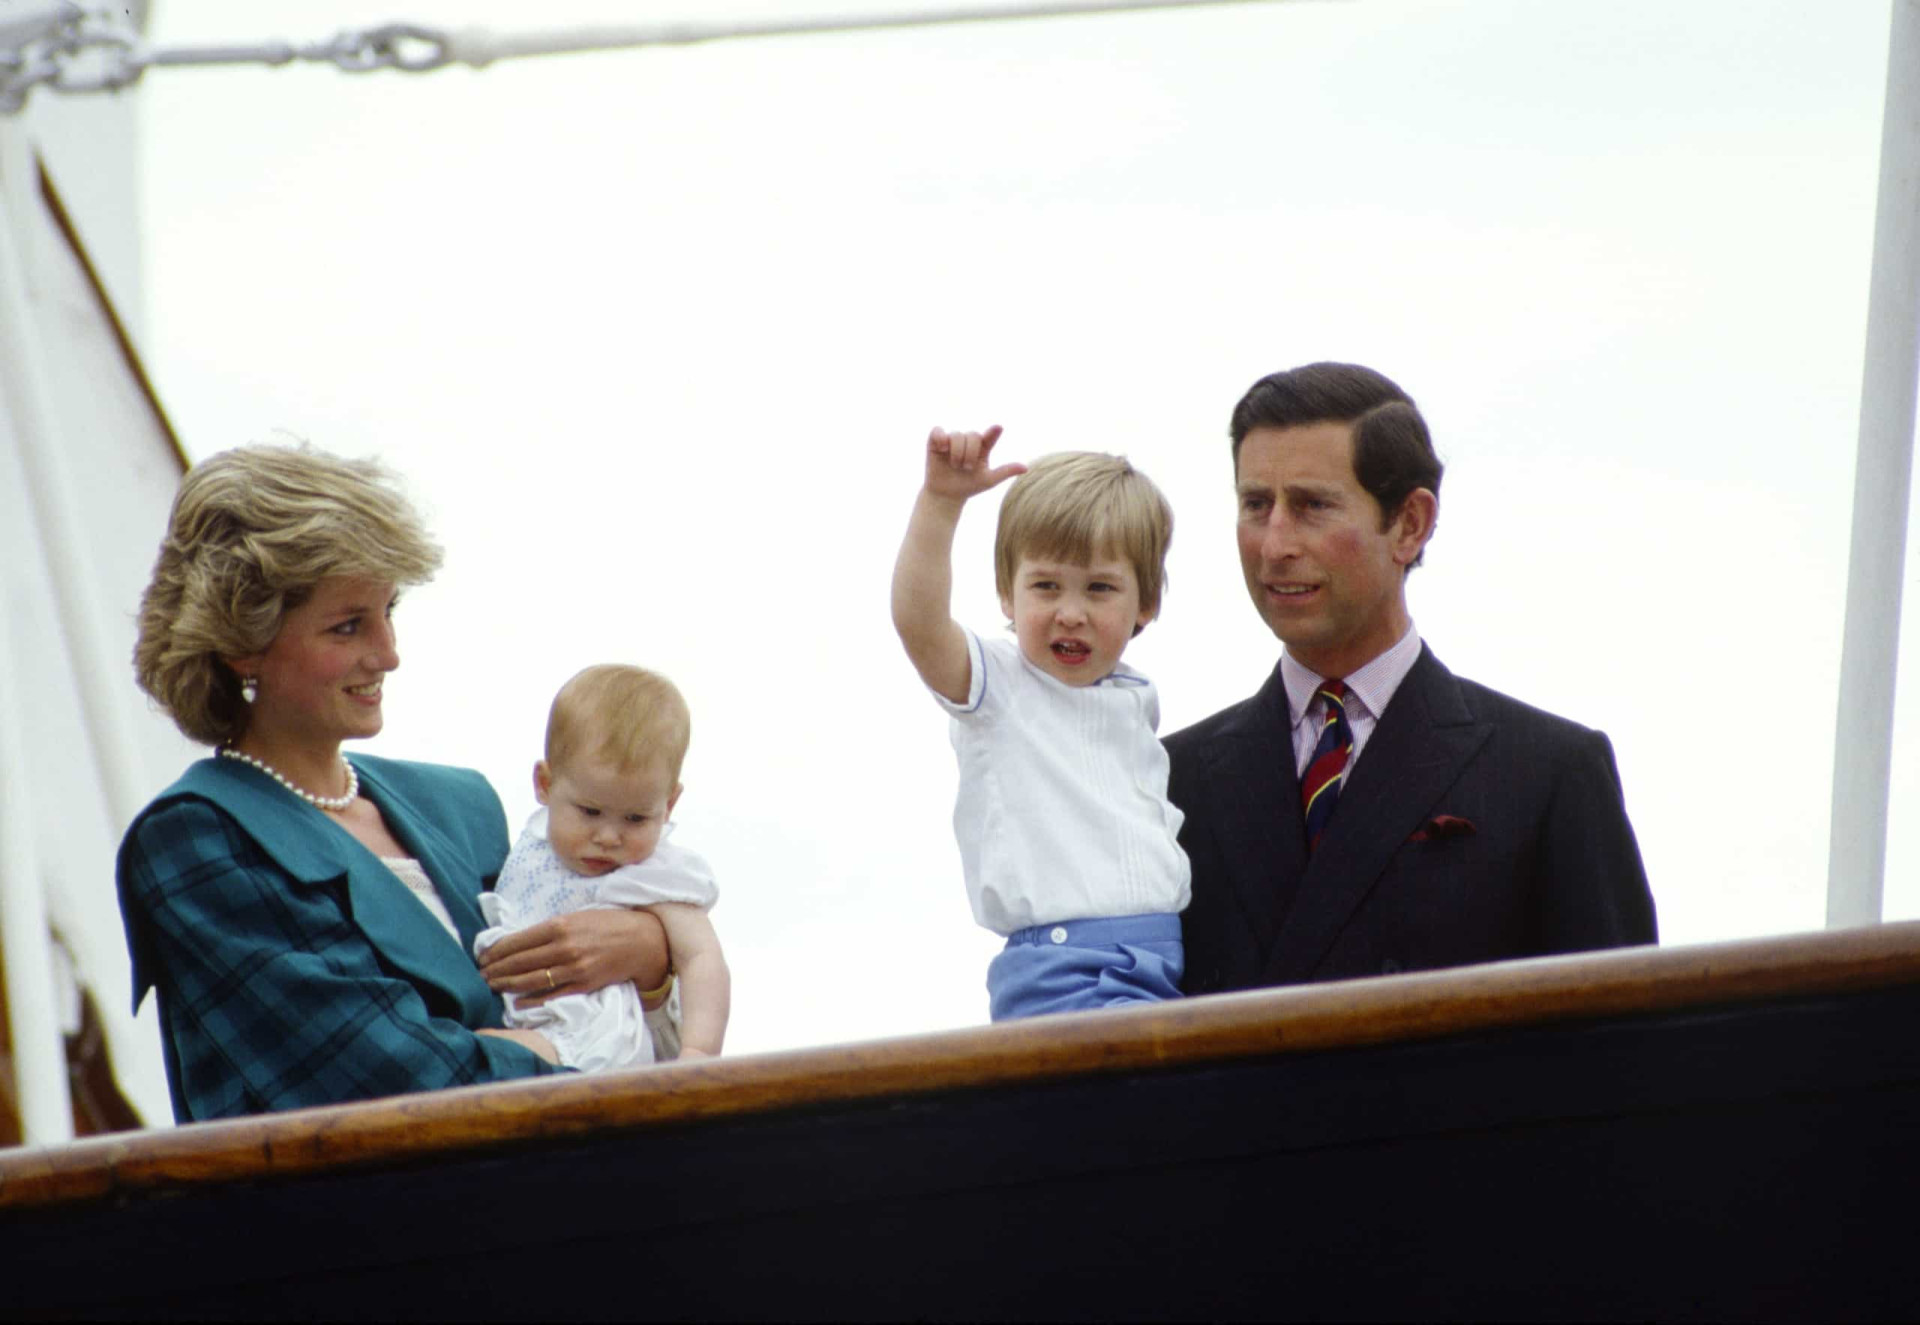 <p>Joining Prince Charles and Princess Diana on their 17-day tour of Italy's sights and cities in April-May 1985 was Prince William and Prince Harry. The family are seen on board <em>Britannia</em> at Venice.</p><p>You may also like:<a href="https://www.starsinsider.com/n/394782?utm_source=msn.com&utm_medium=display&utm_campaign=referral_description&utm_content=474709v3en-ph"> The most unbelievably expensive weddings in history </a></p>